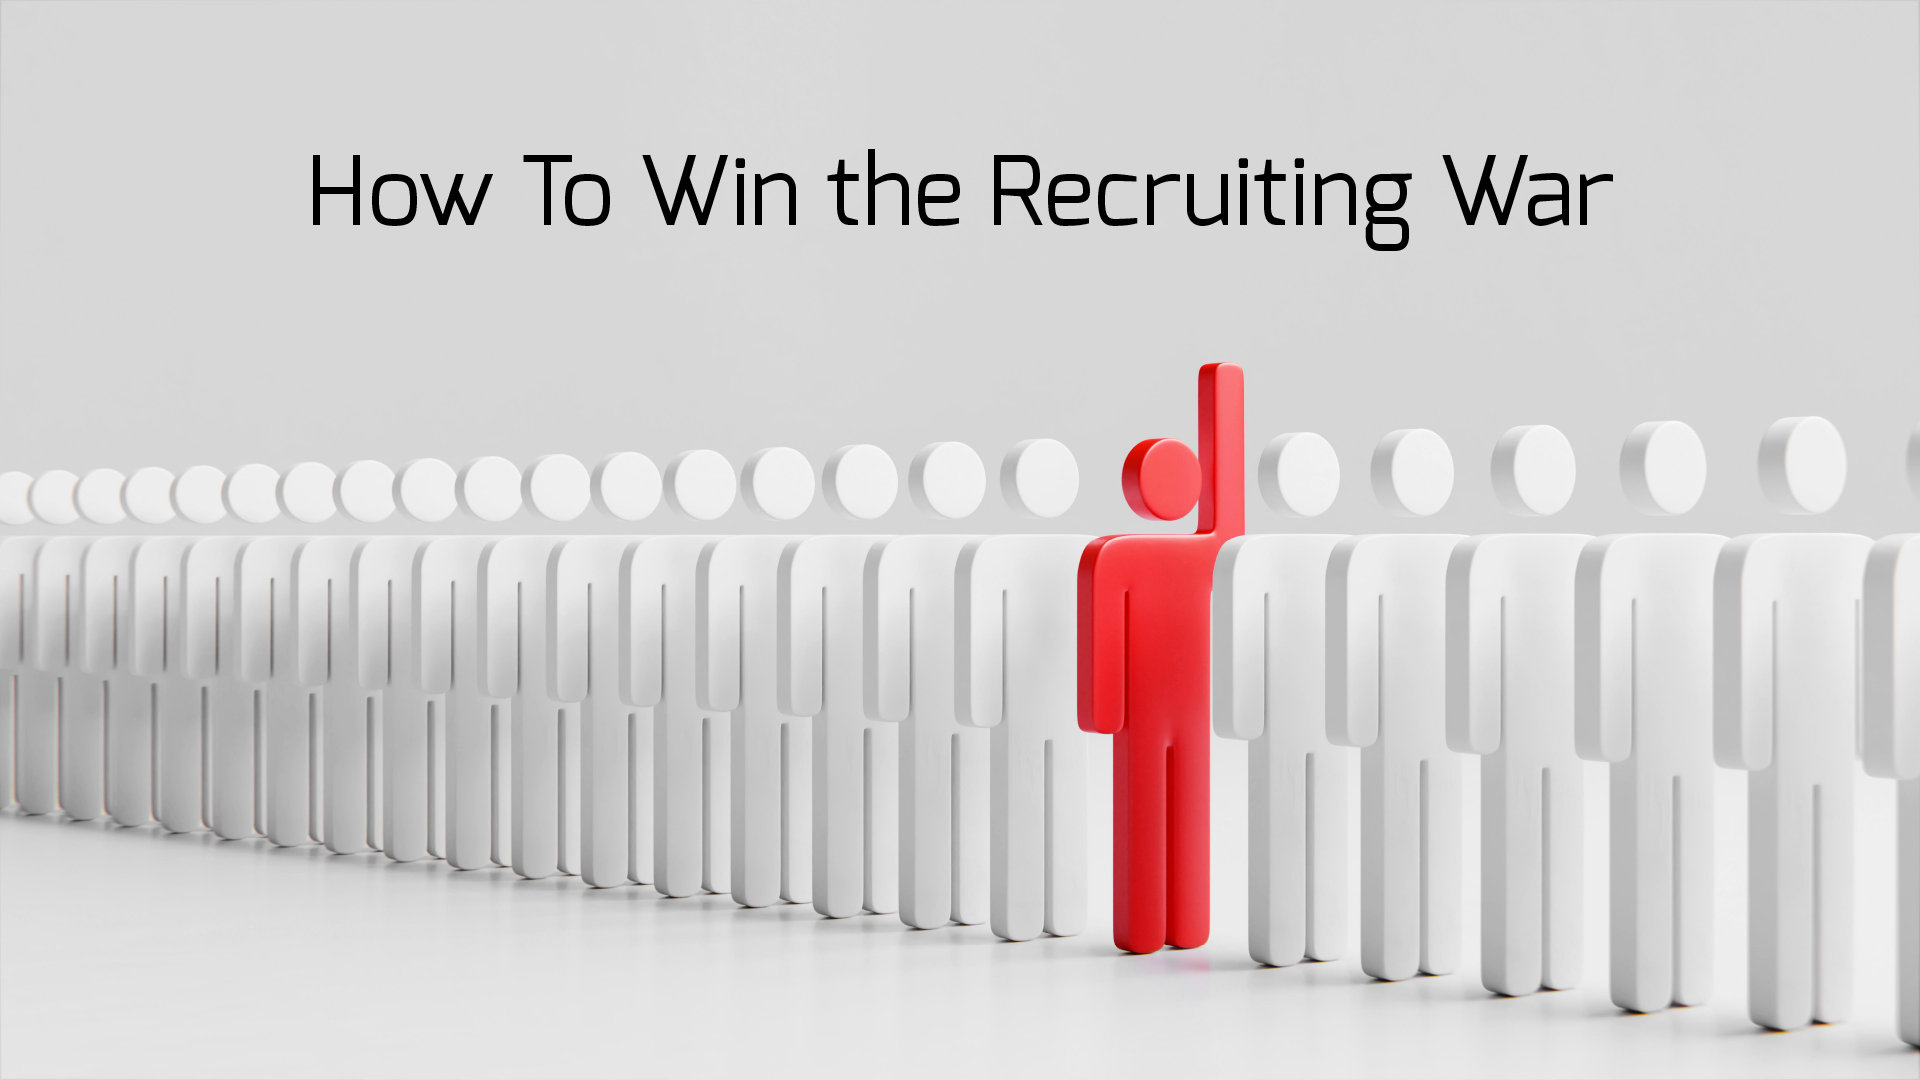 How To Win the Recruiting War